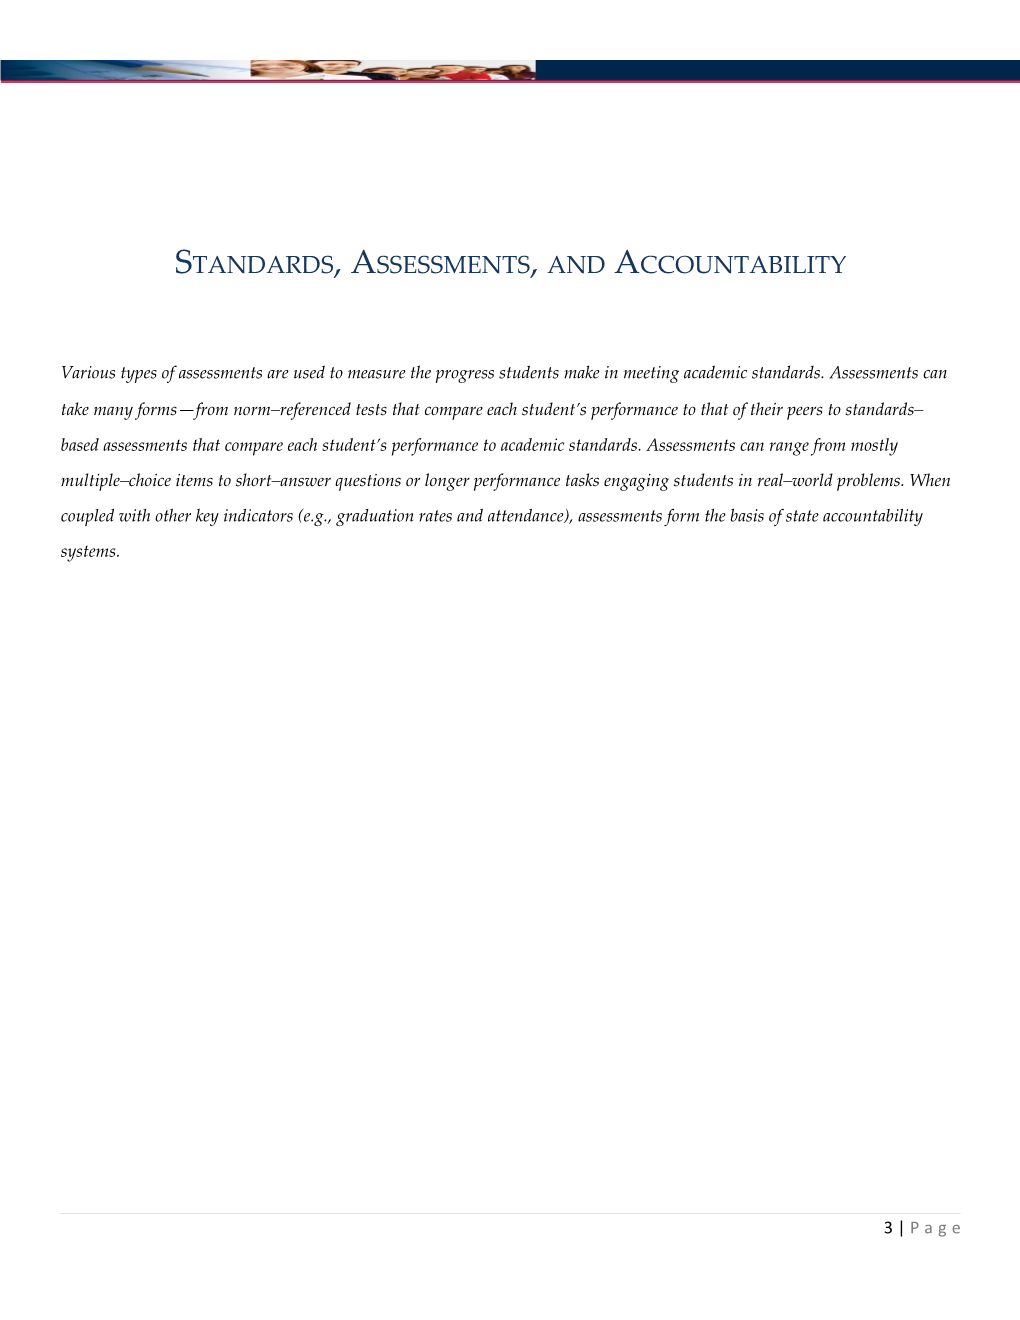 Standards, Assessments and Accountability